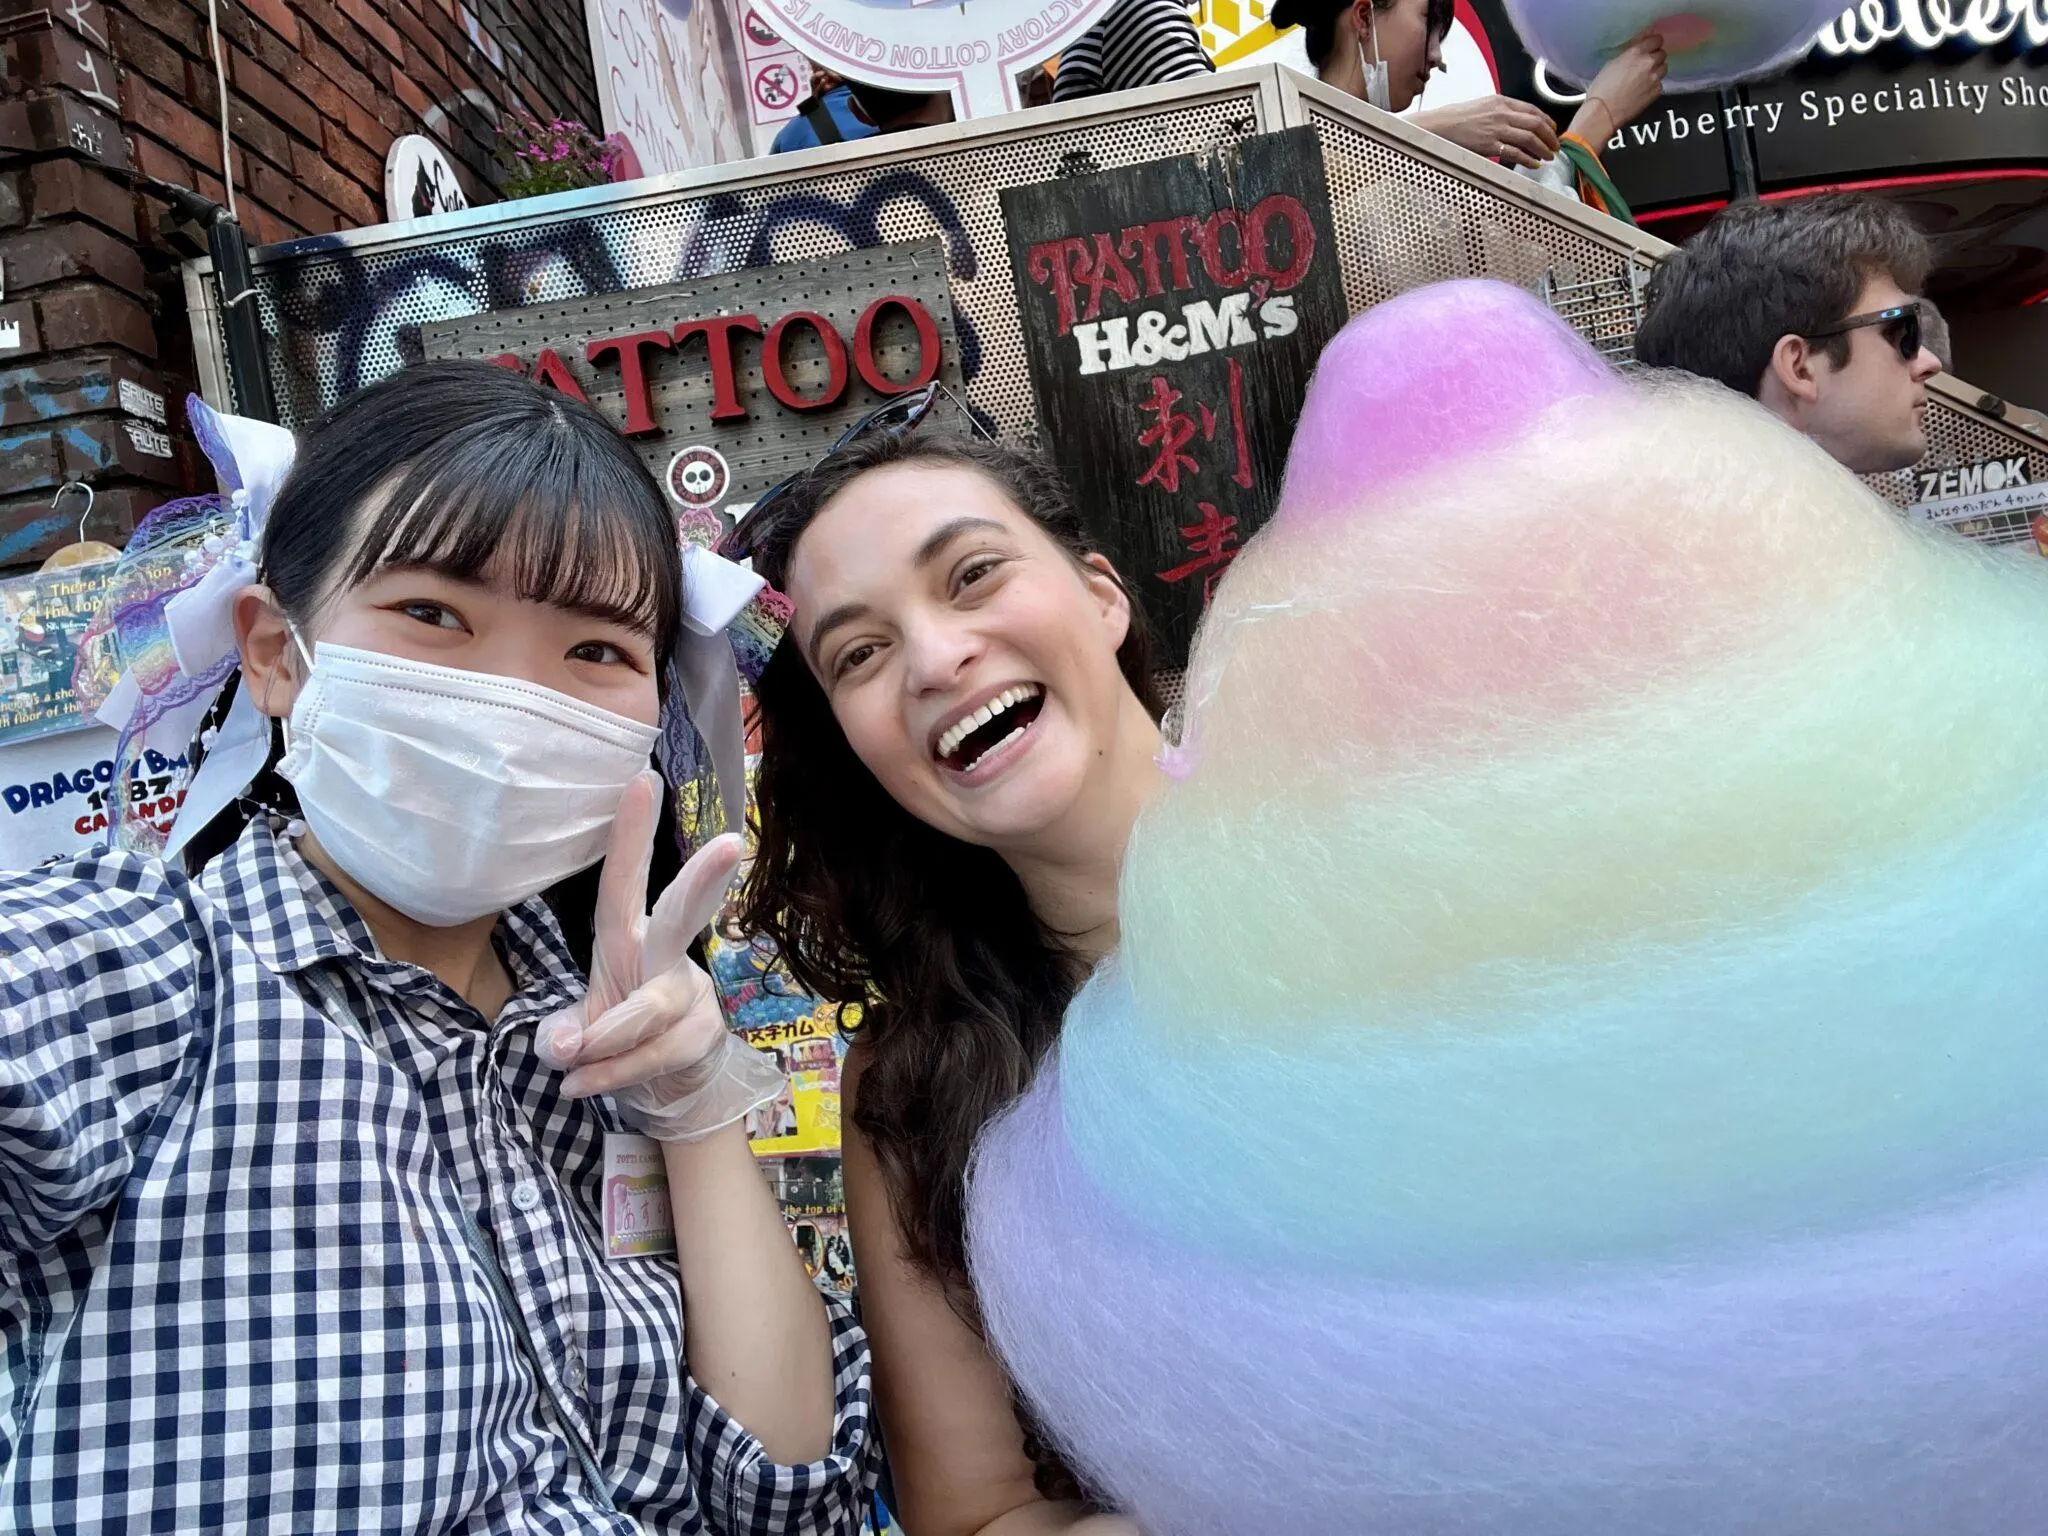 Woman holding giant cotton candy while standing next to store attendant giving peace sign